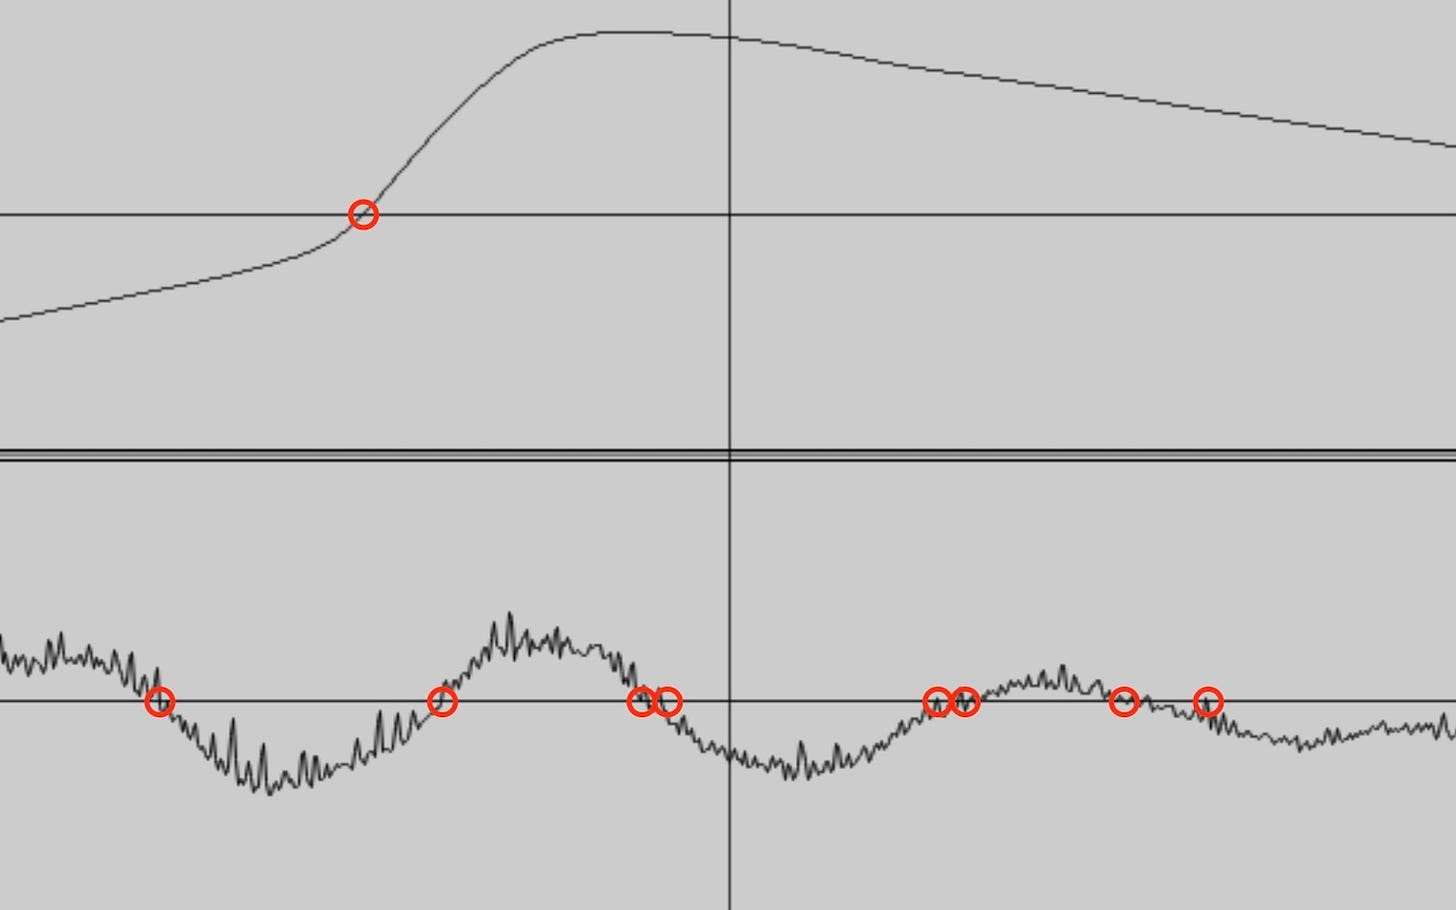 Two quadrants with gray background are intersected by x- and y-axes in black. In the upper quadrant, a graceful arc represents the sound of a kick drum. In the lower quadrant, a squiggly line represents the sound of a snare. Red circles mark the spots where each waveform crosses the x-axis.